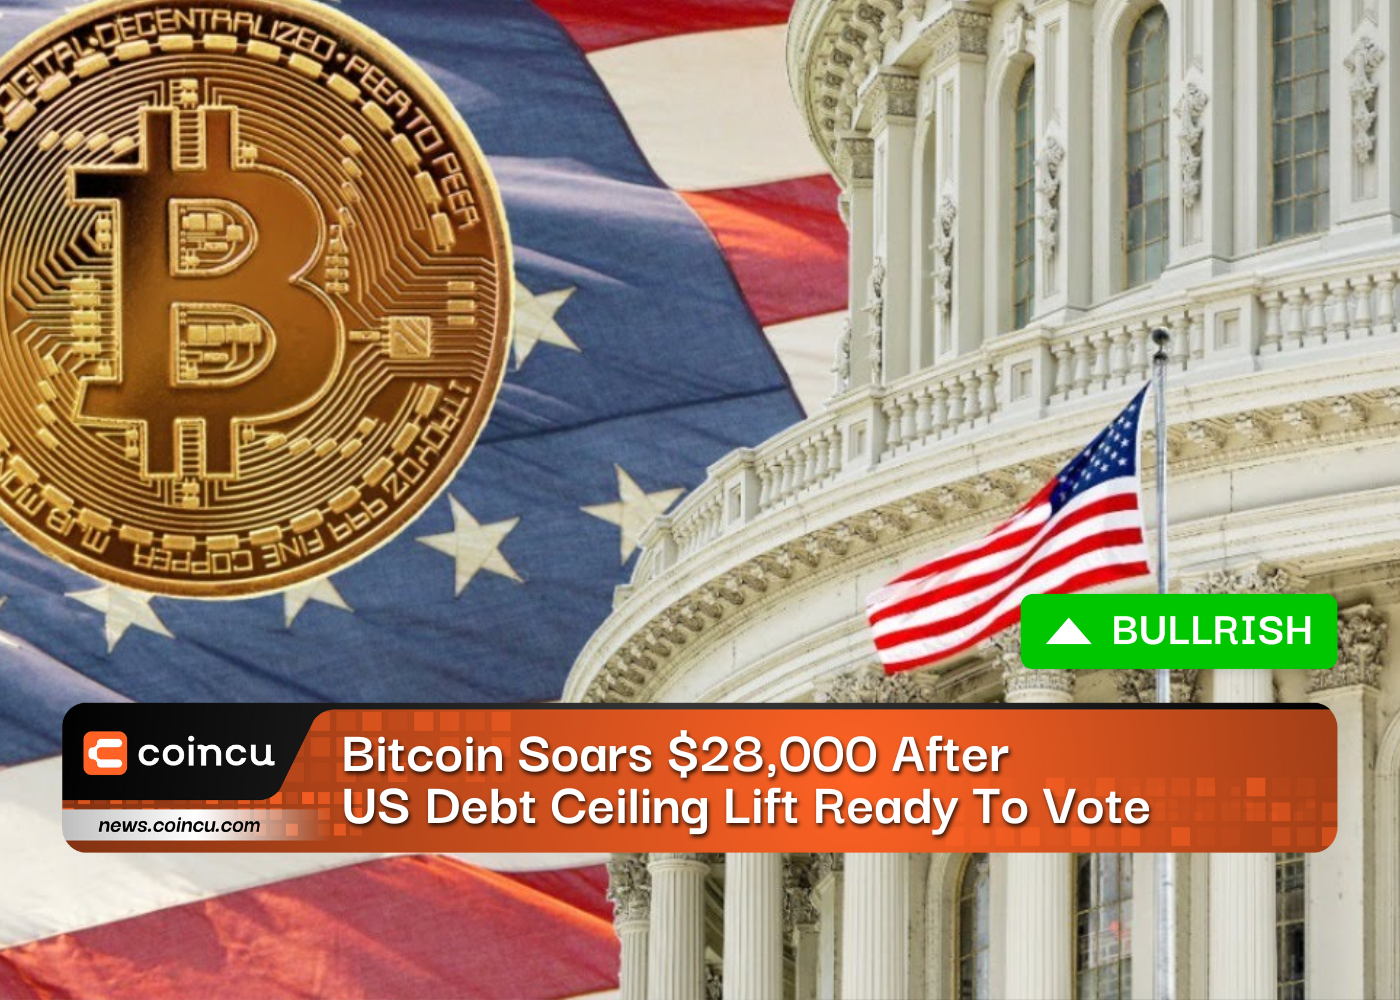 Bitcoin Soars $28,000 After US Debt Ceiling Lift Ready To Vote